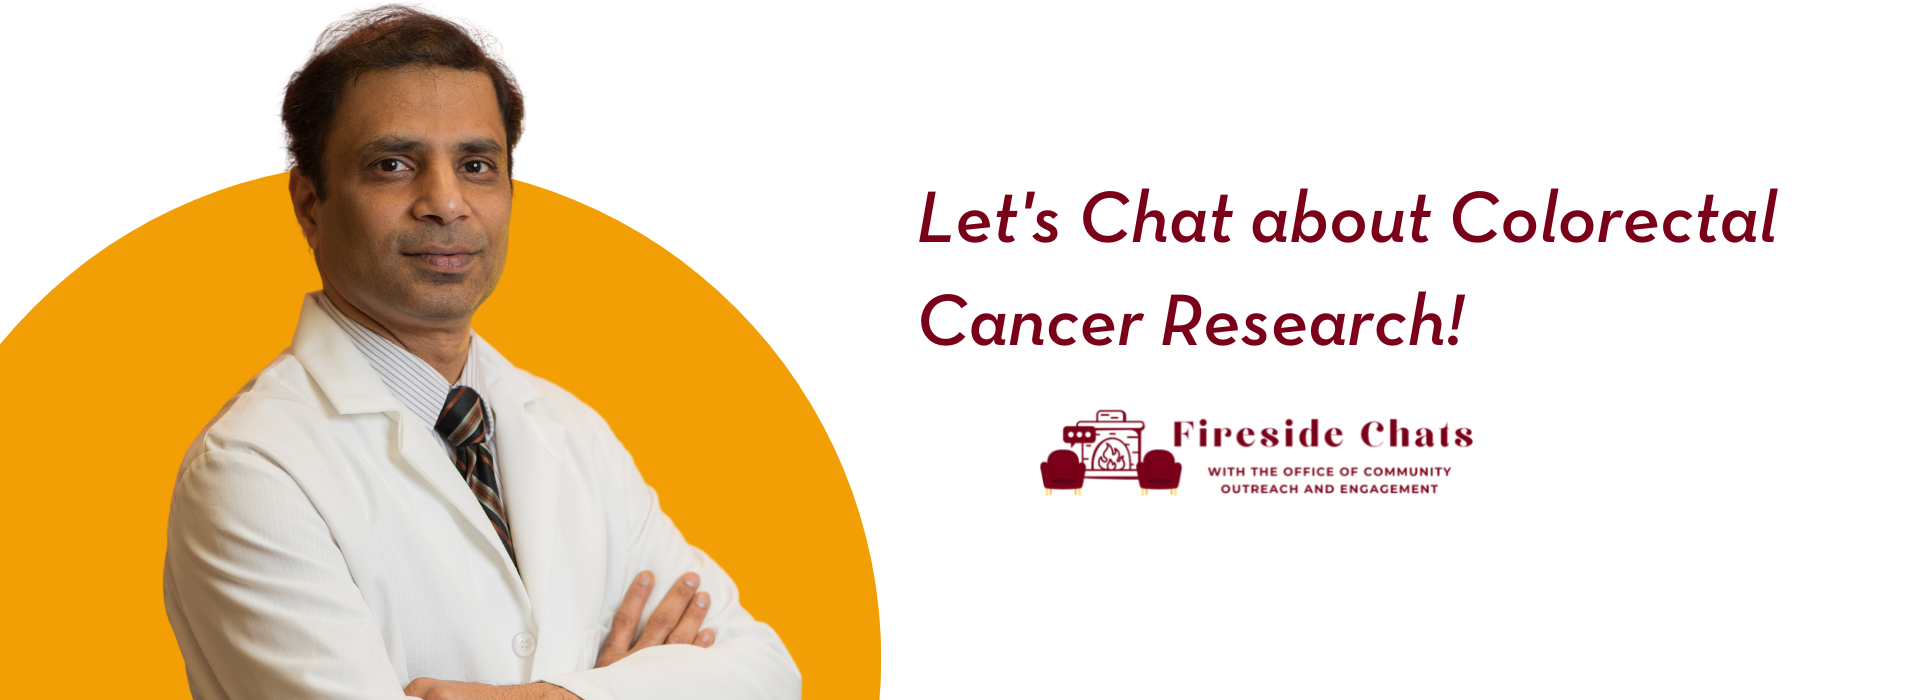 Let's Chat about Colorectal Cancer Research!